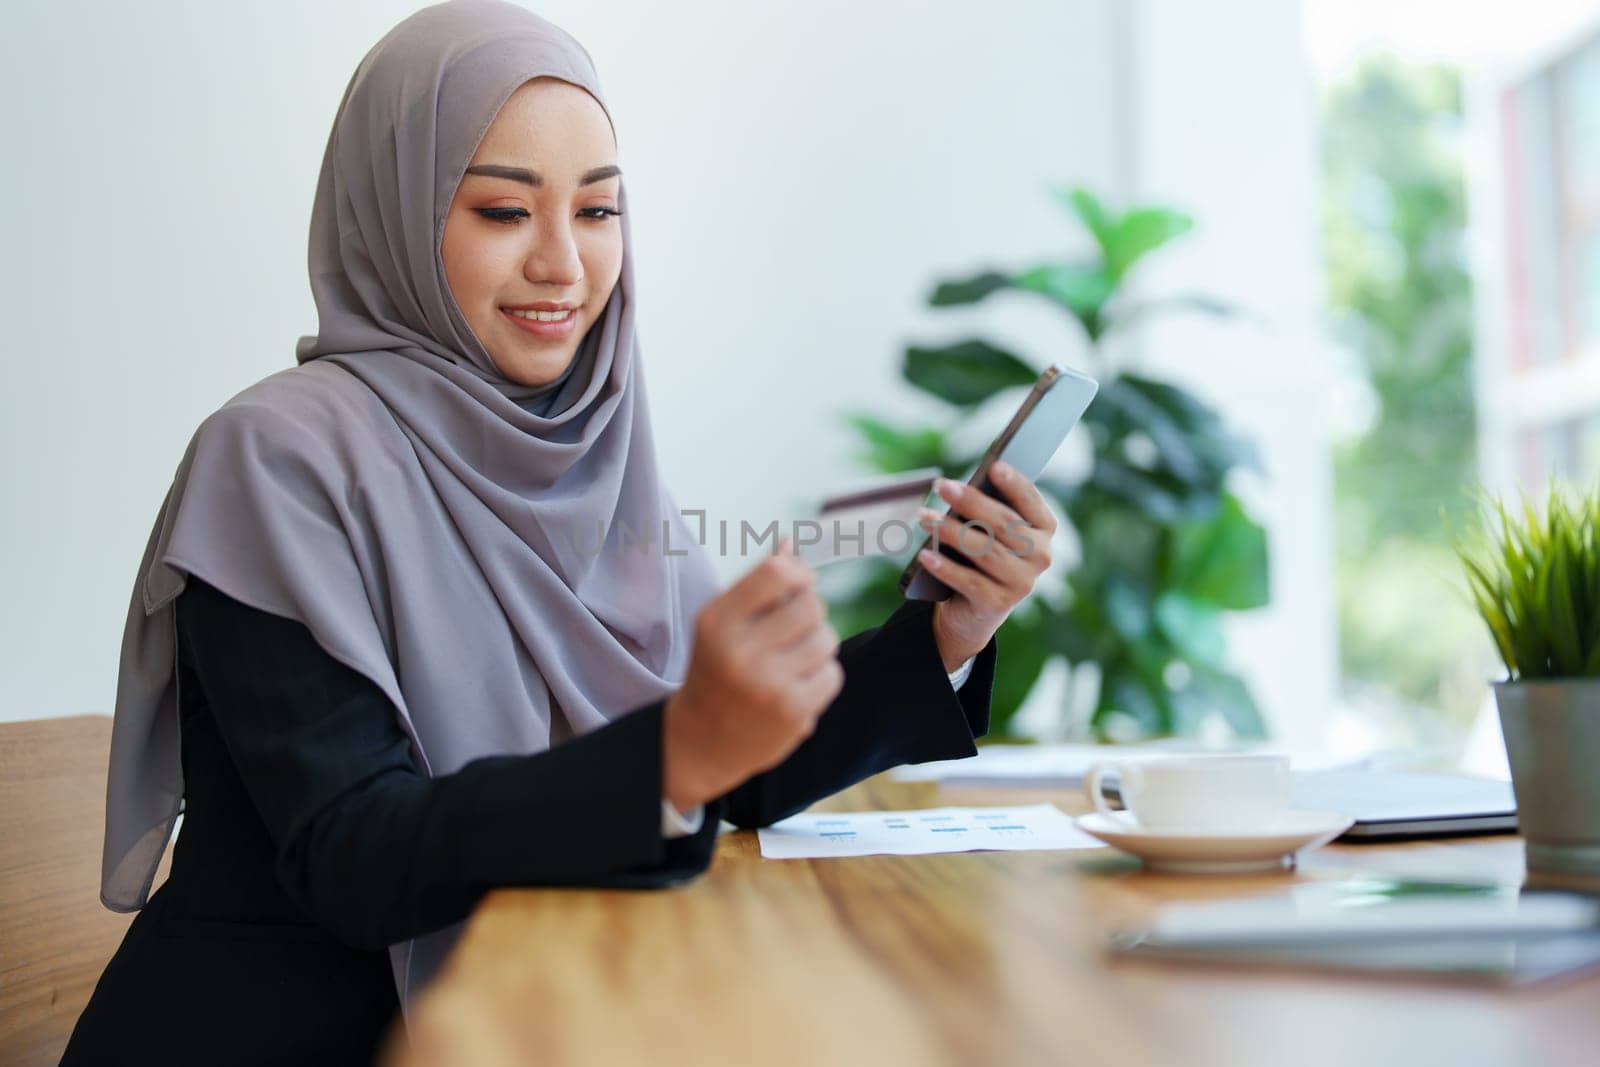 Beautiful Muslim woman shopping online using her phone and credit card.